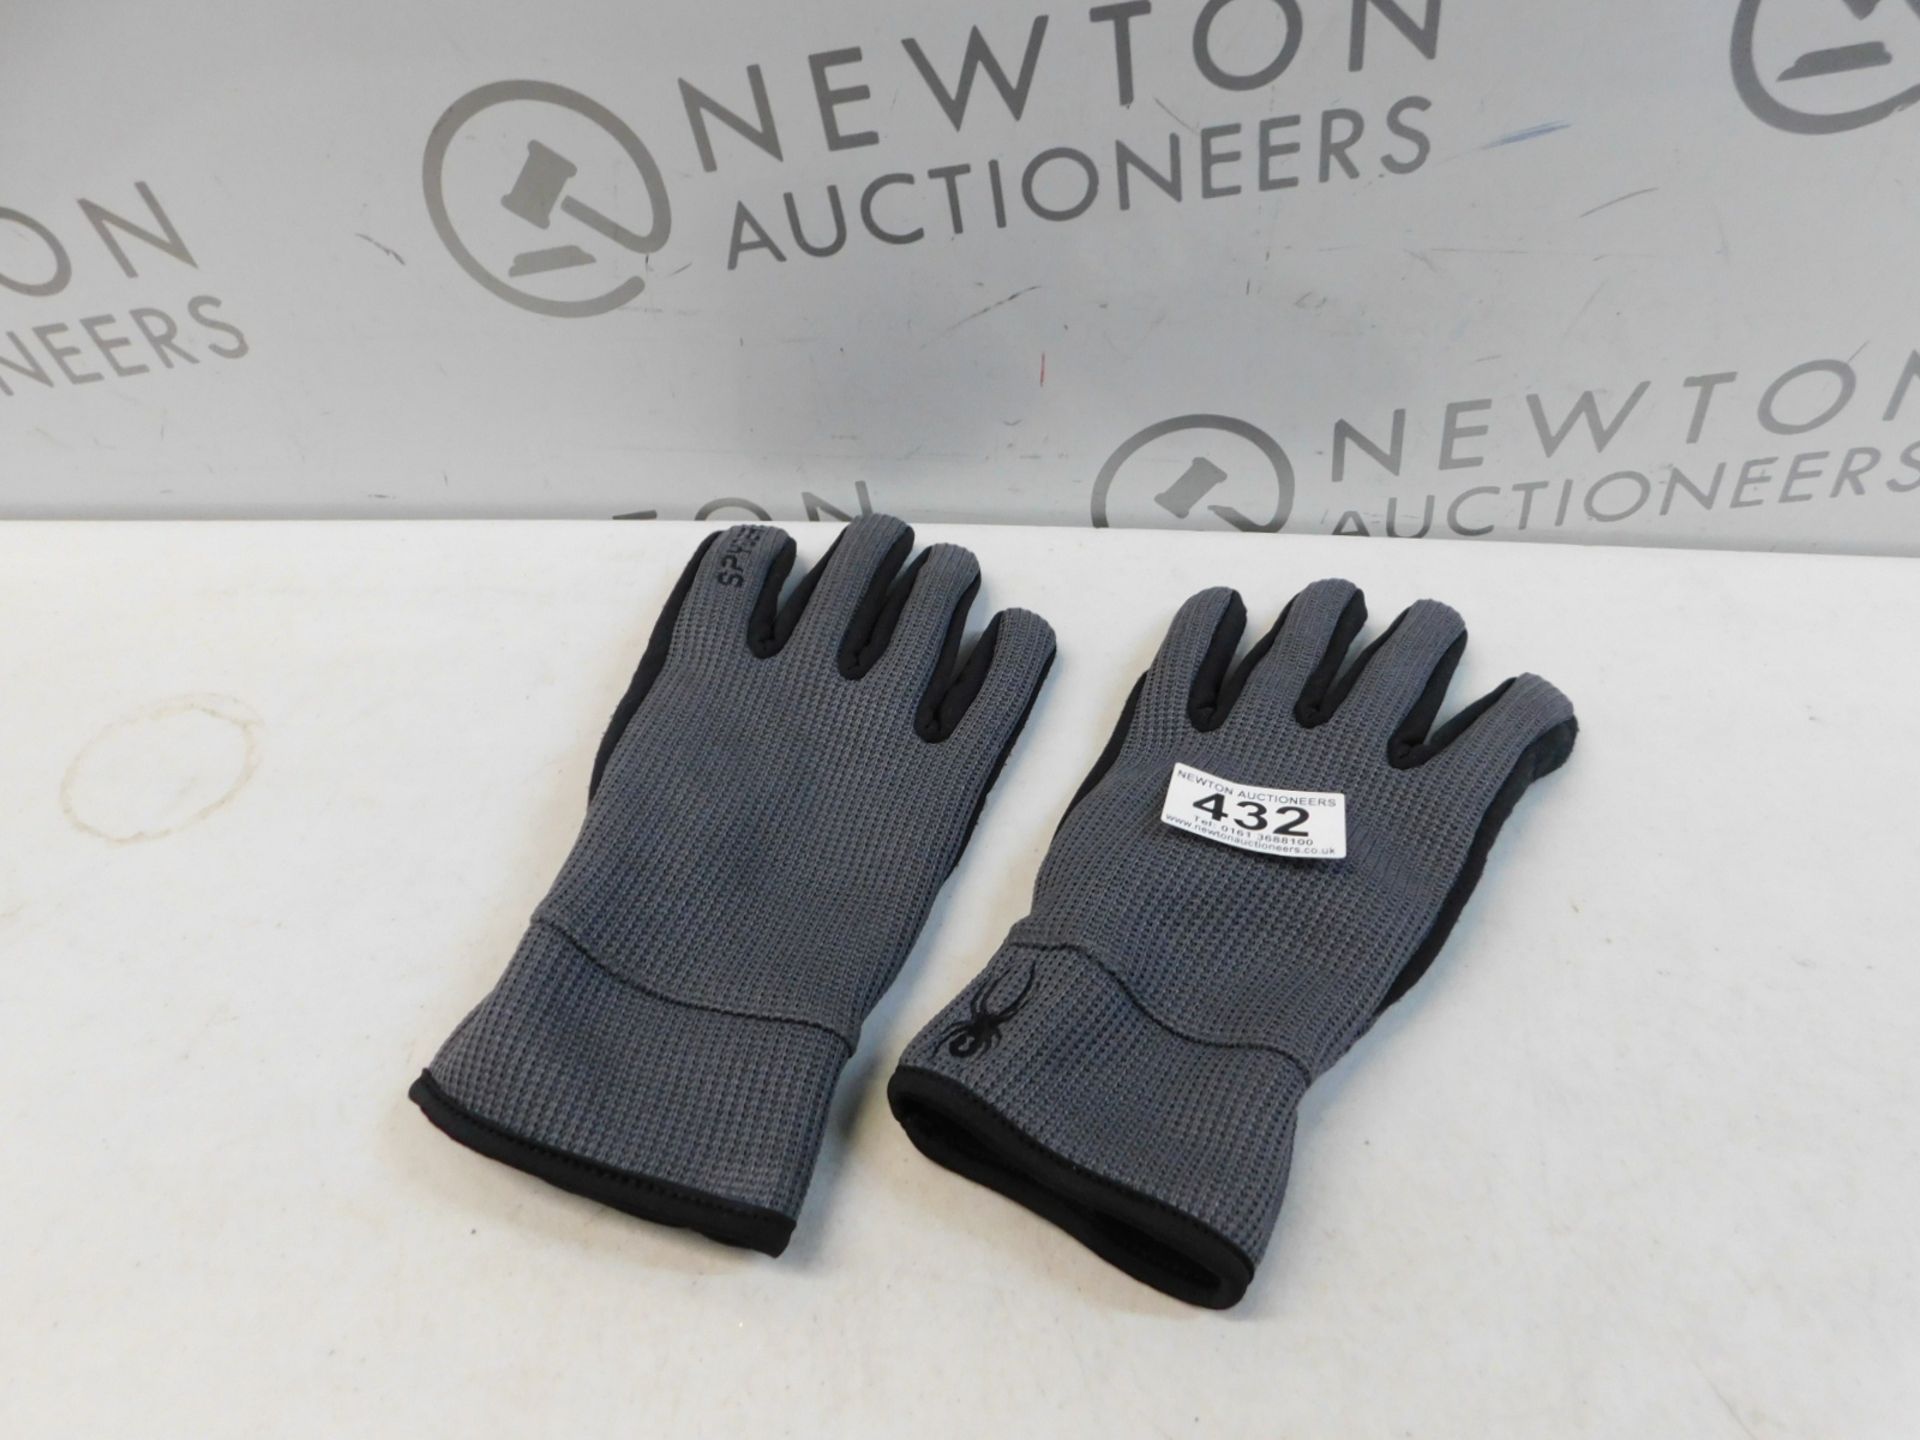 1 PAIR OF SPYDER STRETCH FLEECE CORE CONDUCT GLOVES SIZE XL RRP Â£24.99